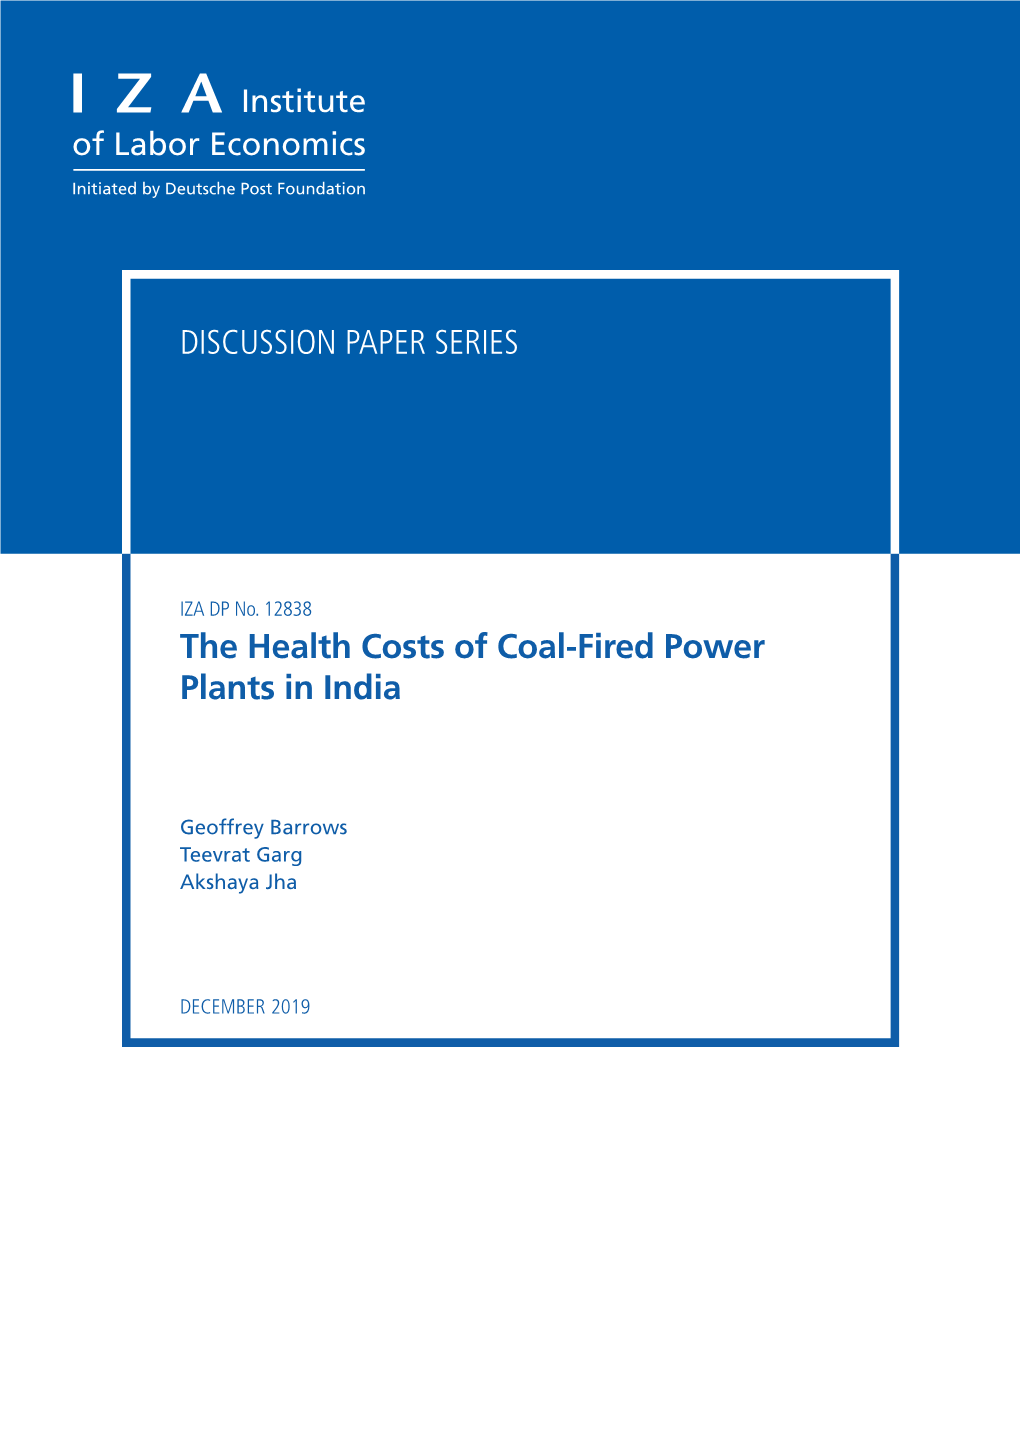 The Health Costs of Coal-Fired Power Plants in India